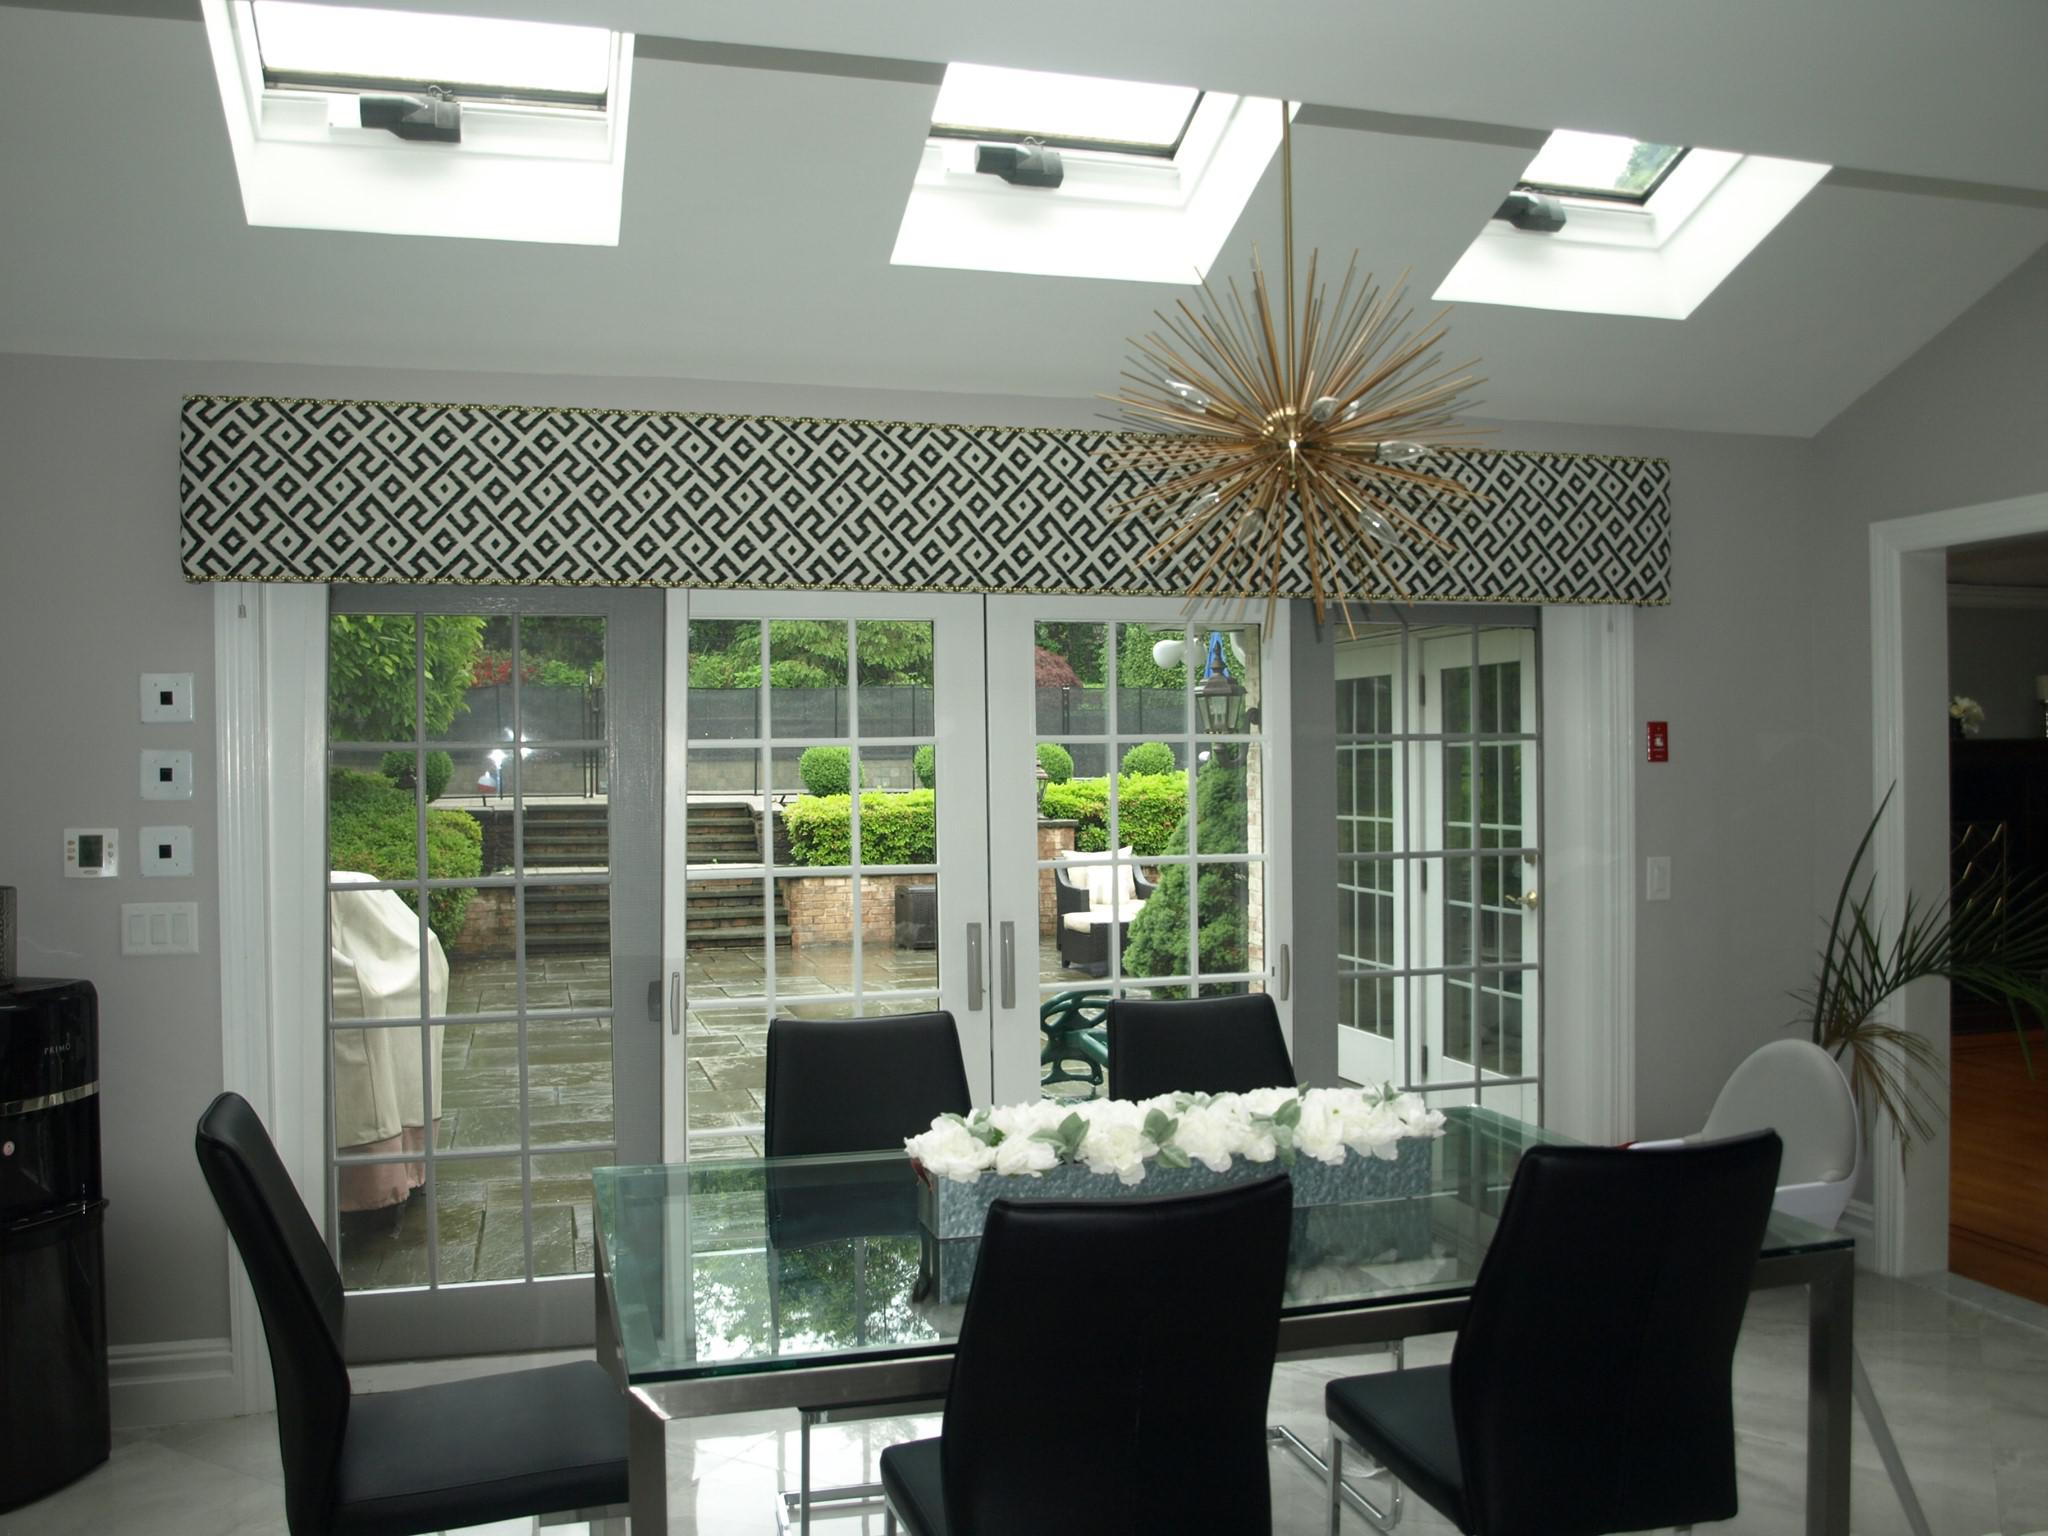 Patio doors and skylights can brighten up any room. However, that alone can leave something to be desired...but what? A custom cornice in the perfect pattern is your answer! Call Budget Blinds of Paramus & Westwood for your finishing touch!  BudgetBlindsOfParamus  FreeConsultation  WindowWednesday  